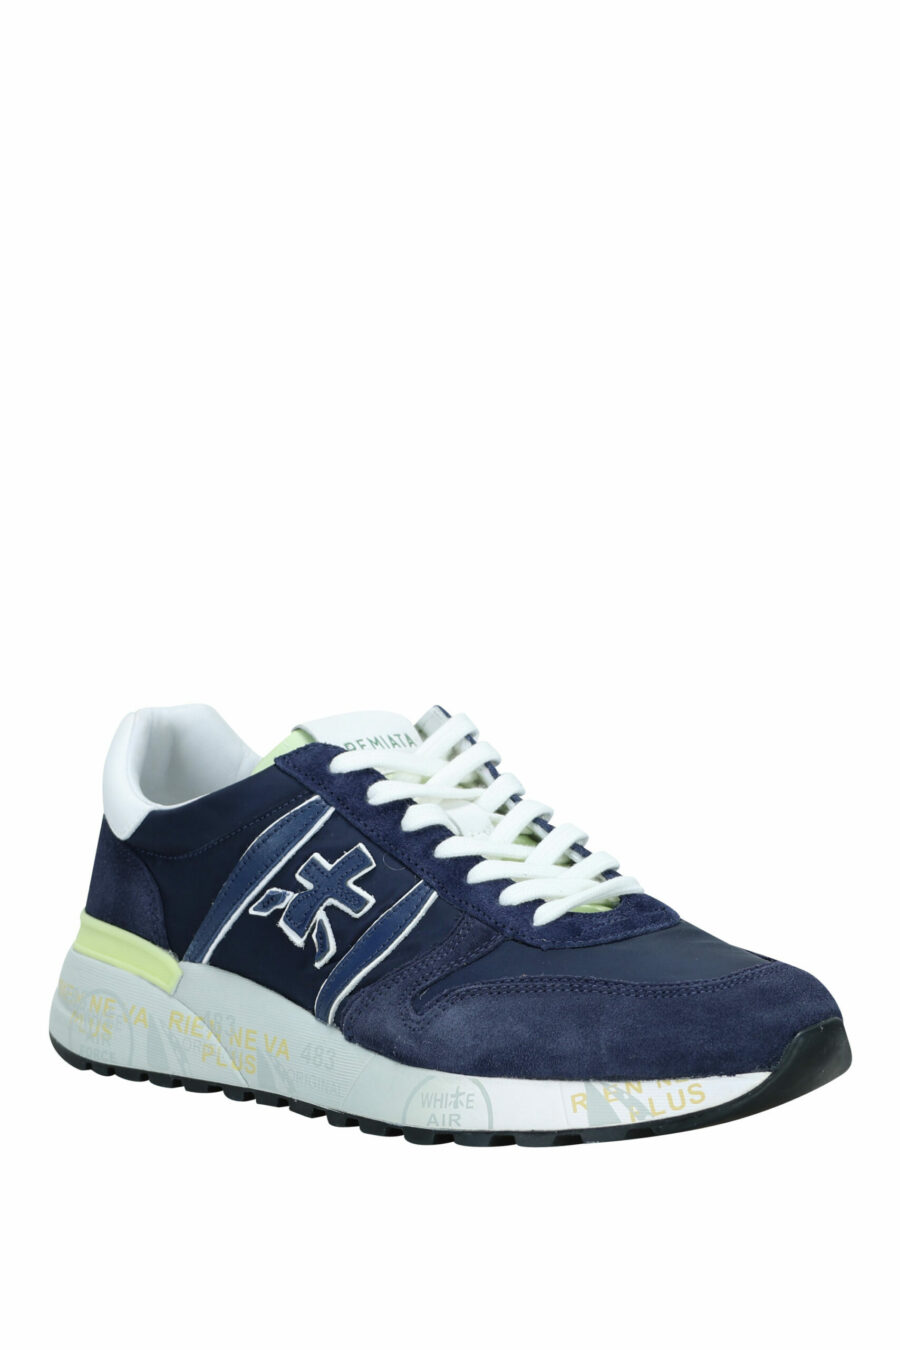 Blue trainers with lime green "Lander 6634" - 8053680268835 1 scaled